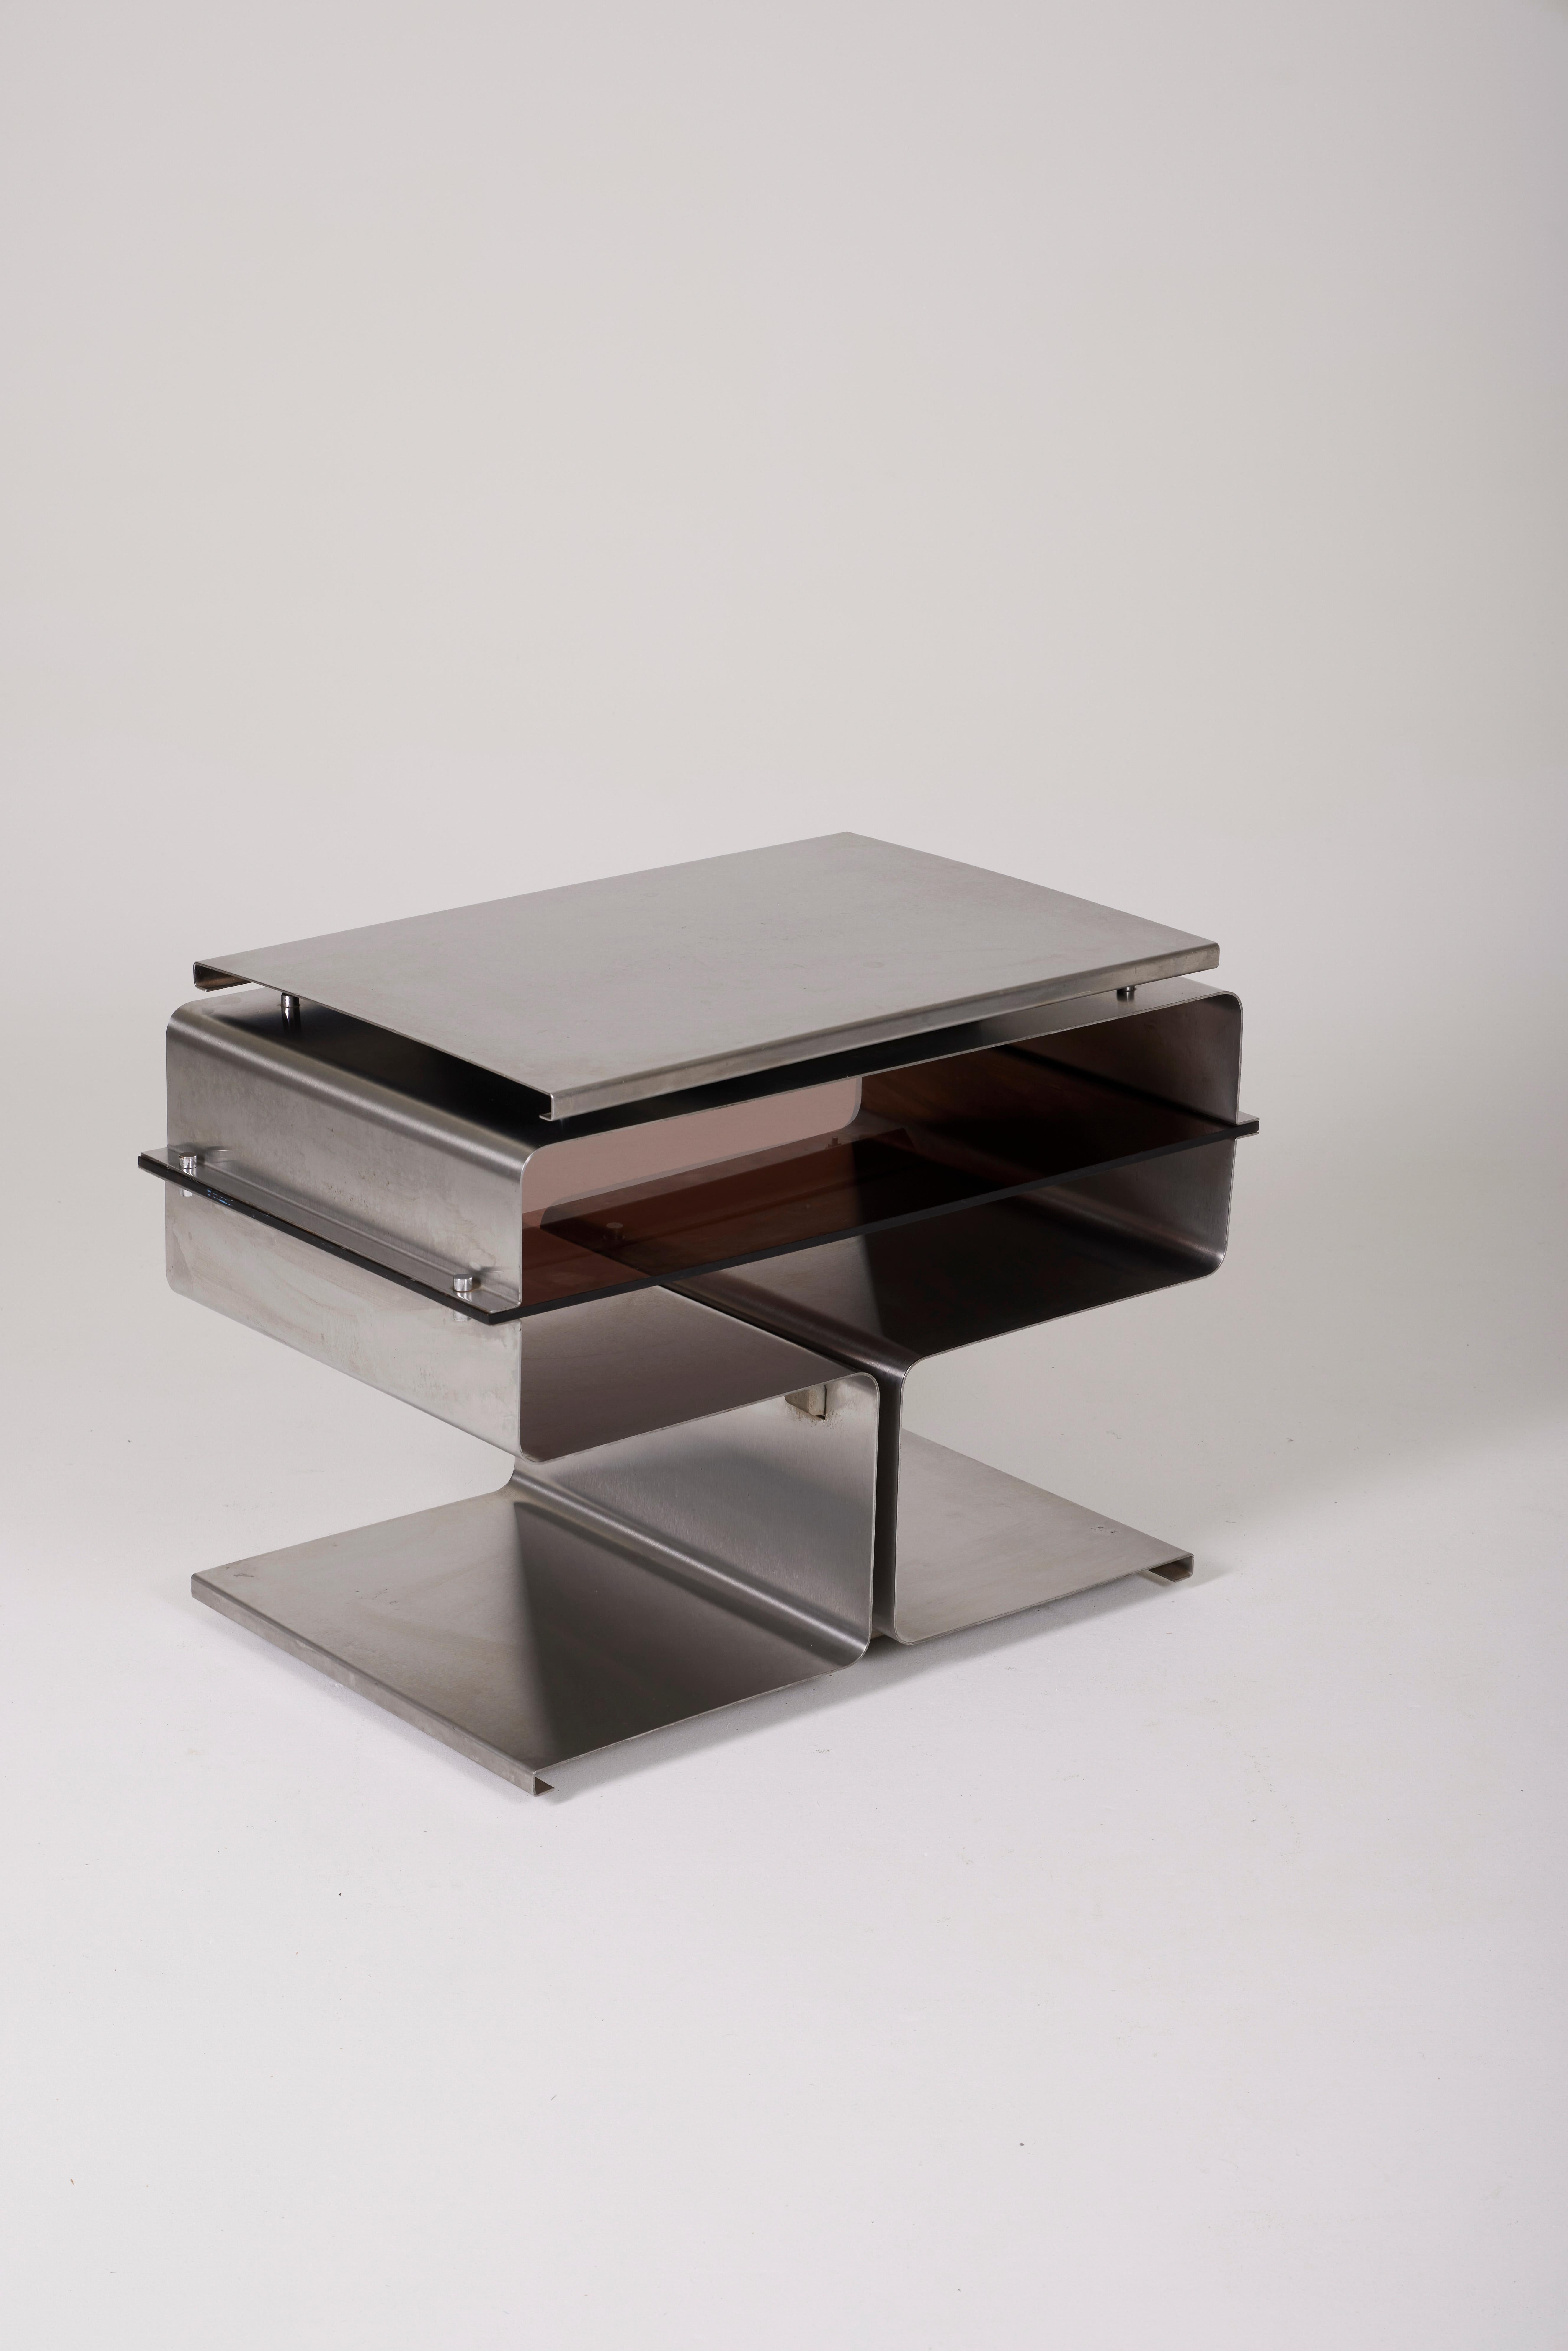 20th Century Side Table In Brushed Steel And Plexiglass, François Monnet, 1970s